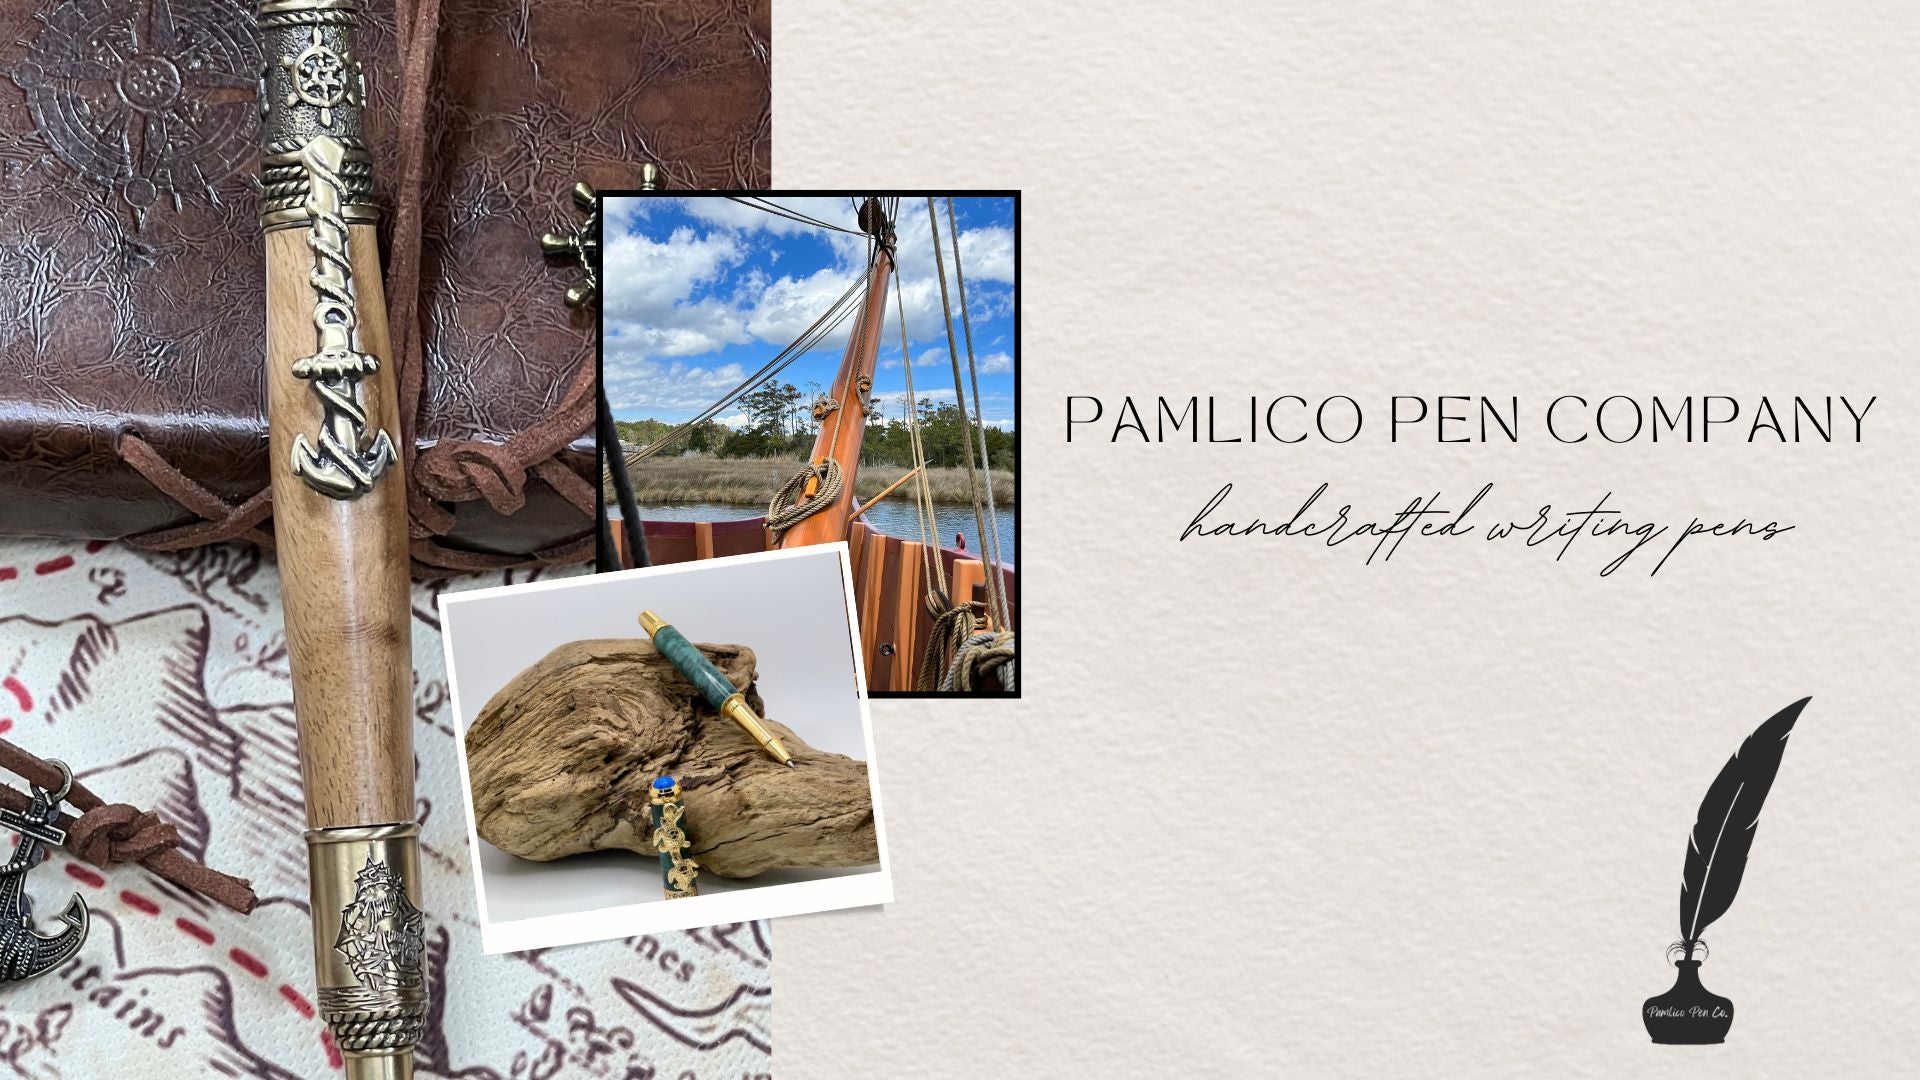 Load video: Intro Video to Pamlico Pen Company